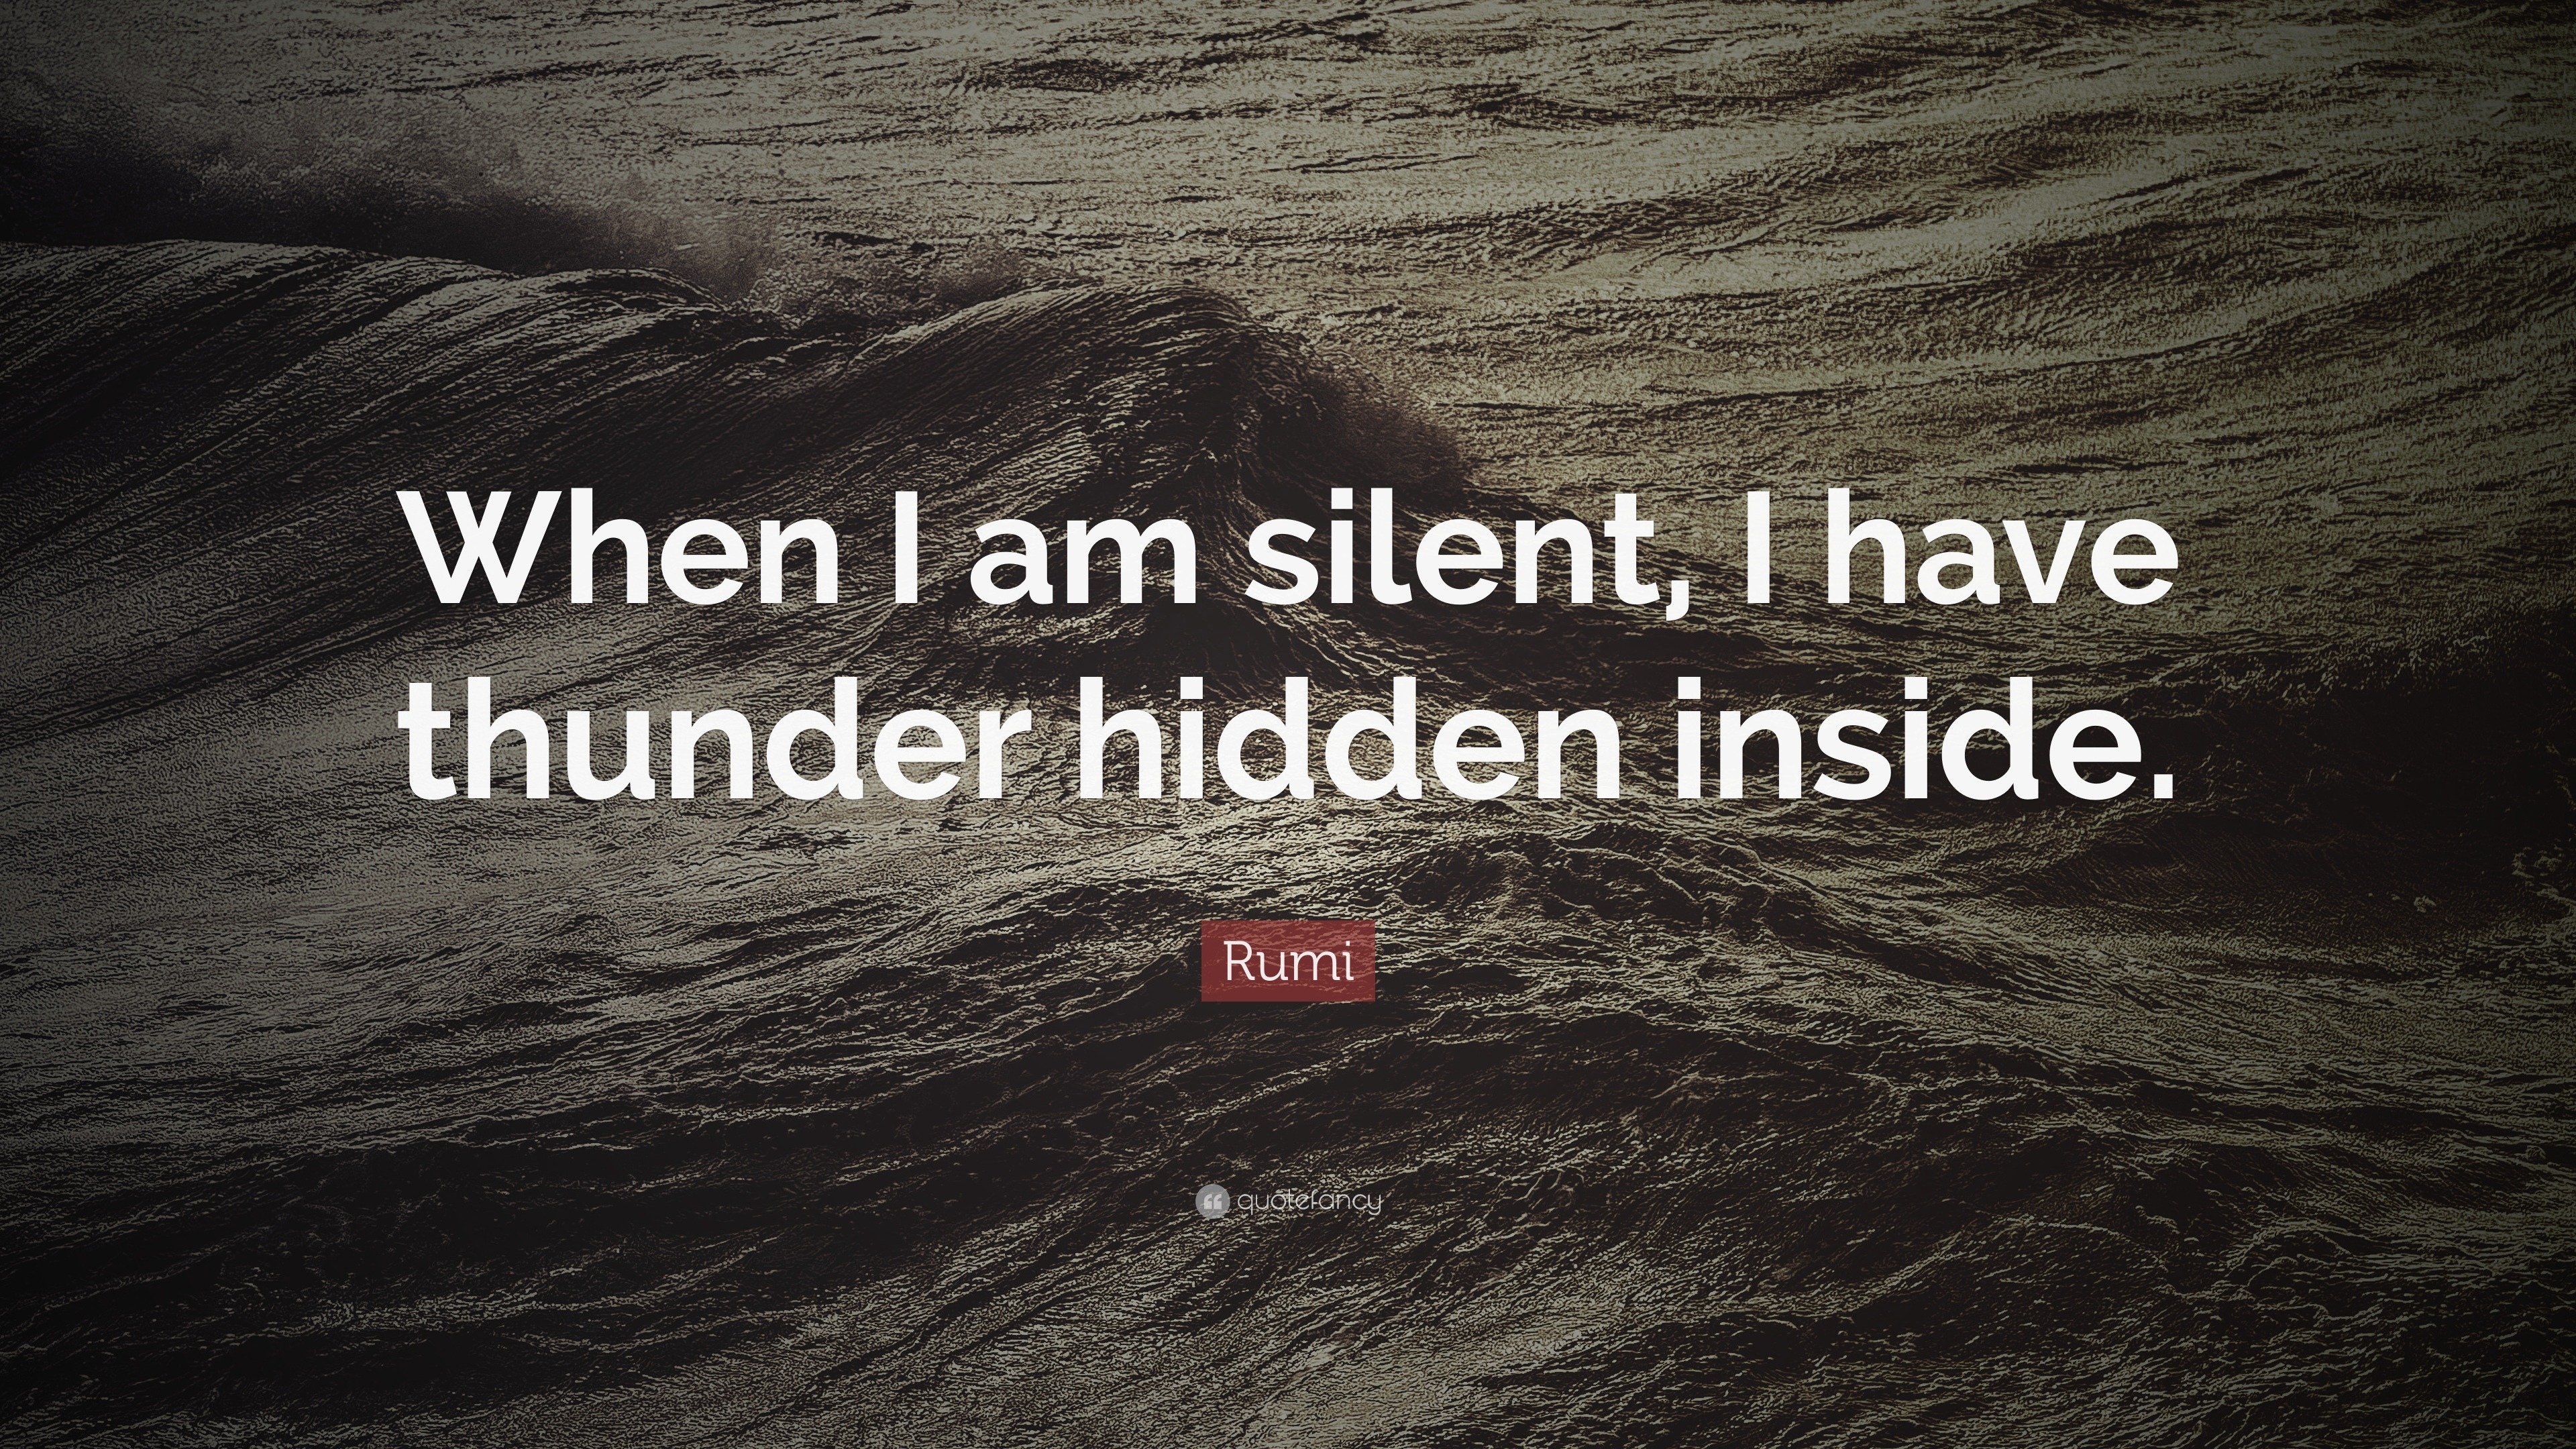 Rumi Quote “When I am silent I have thunder hidden inside ”